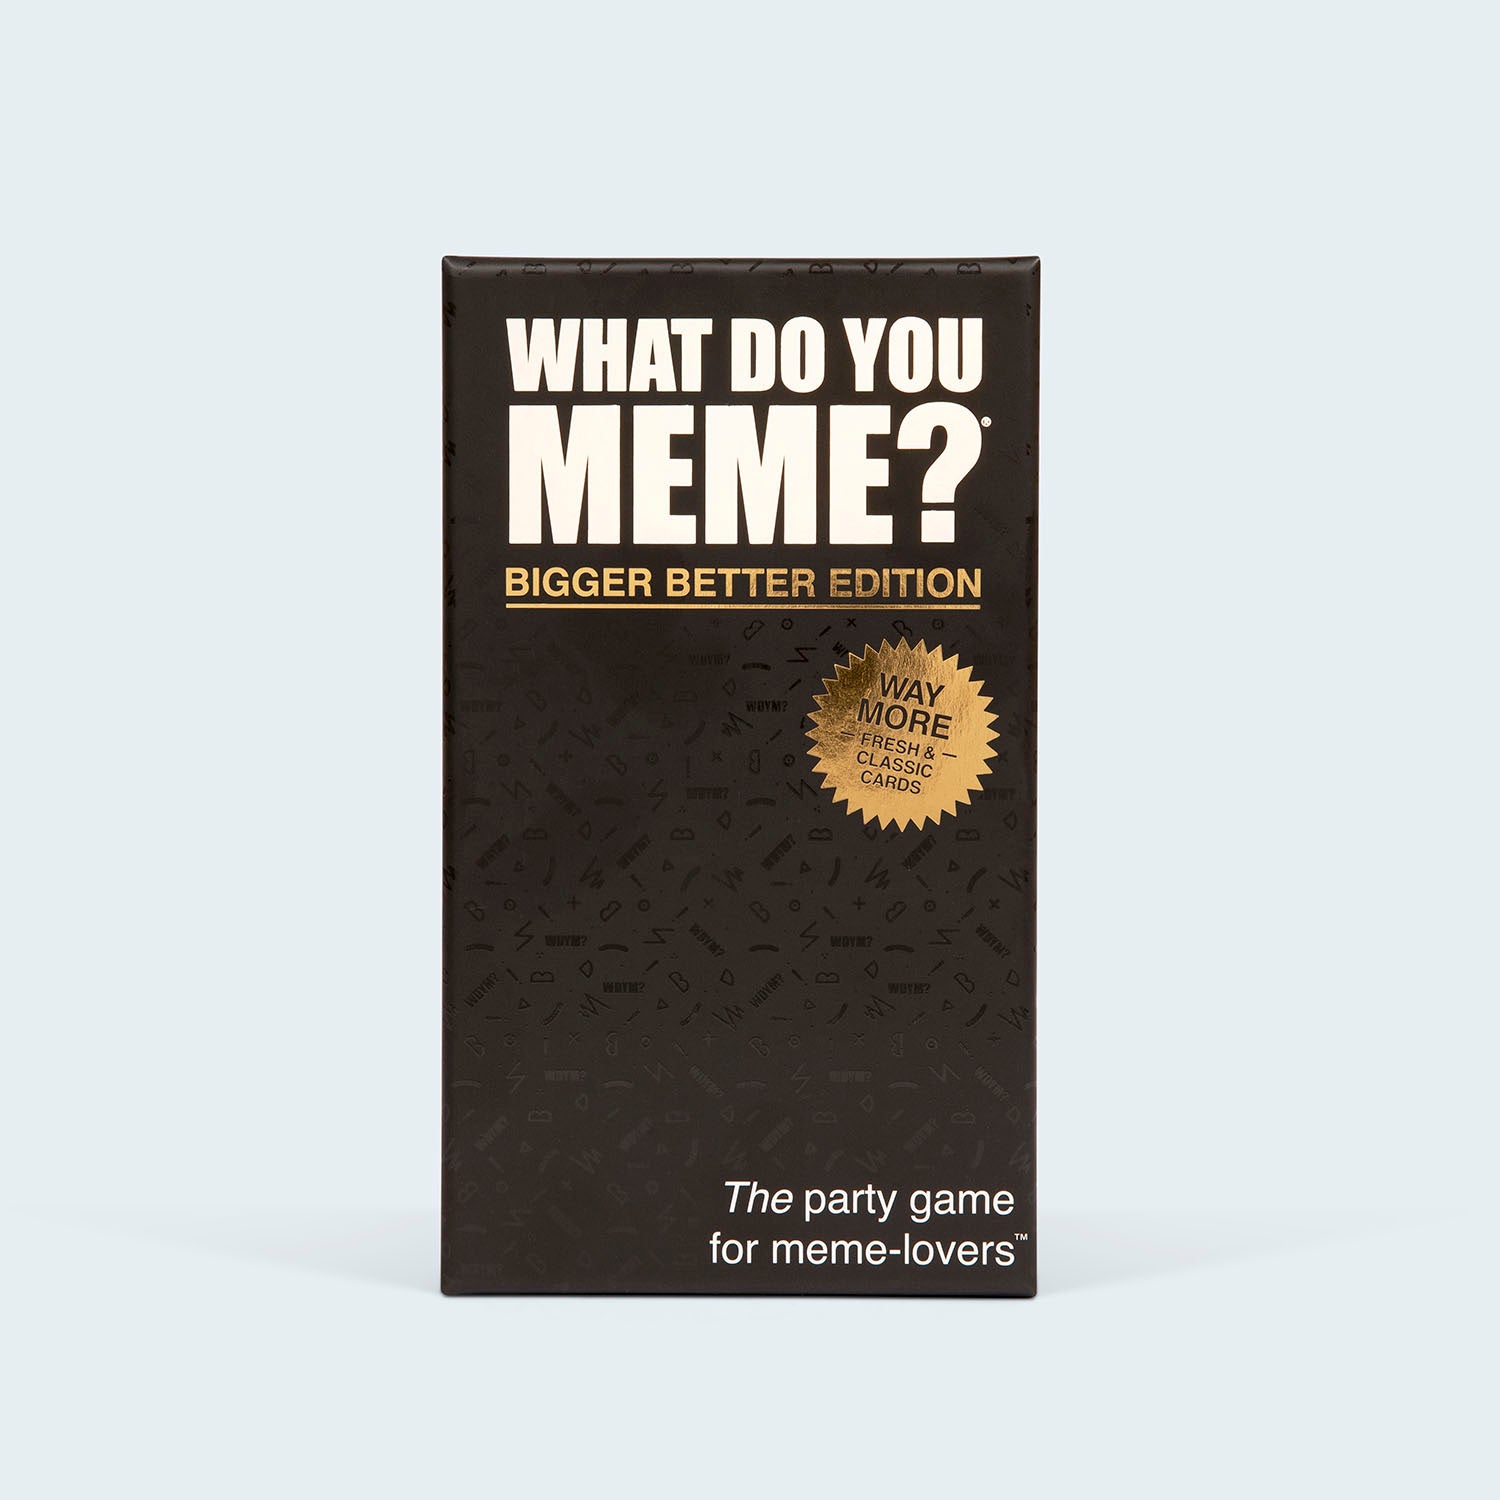 what-do-you-meme-bigger-better-edition-game-box-and-game-play-04-what-do-you-meme-by-relatable